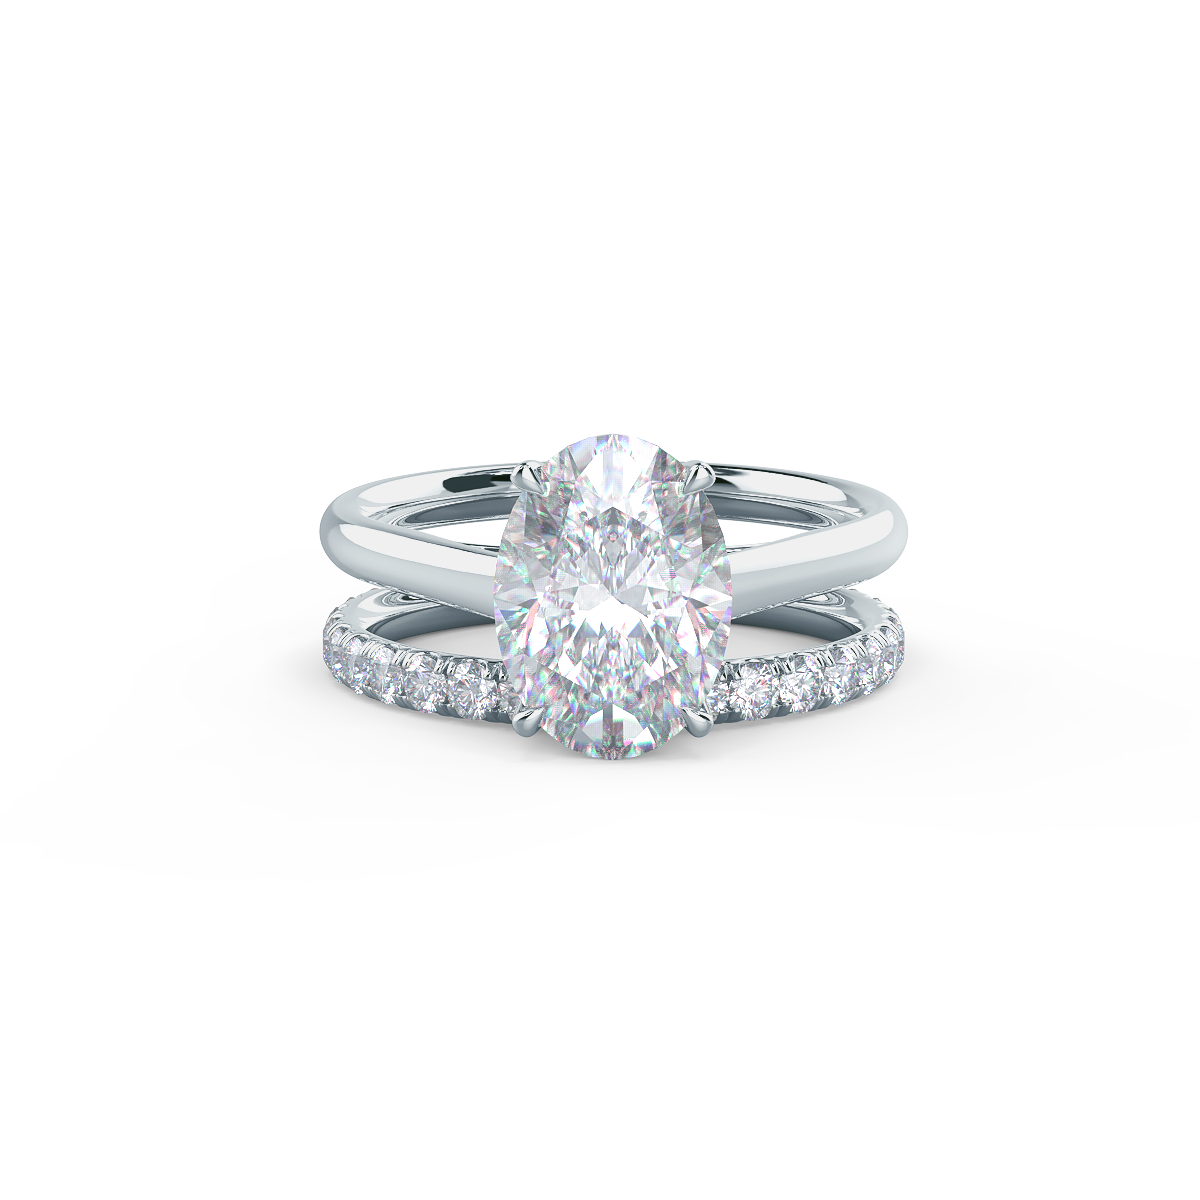  This setting pairs with a variety of wedding band styles.    Shop All Wedding Bands   